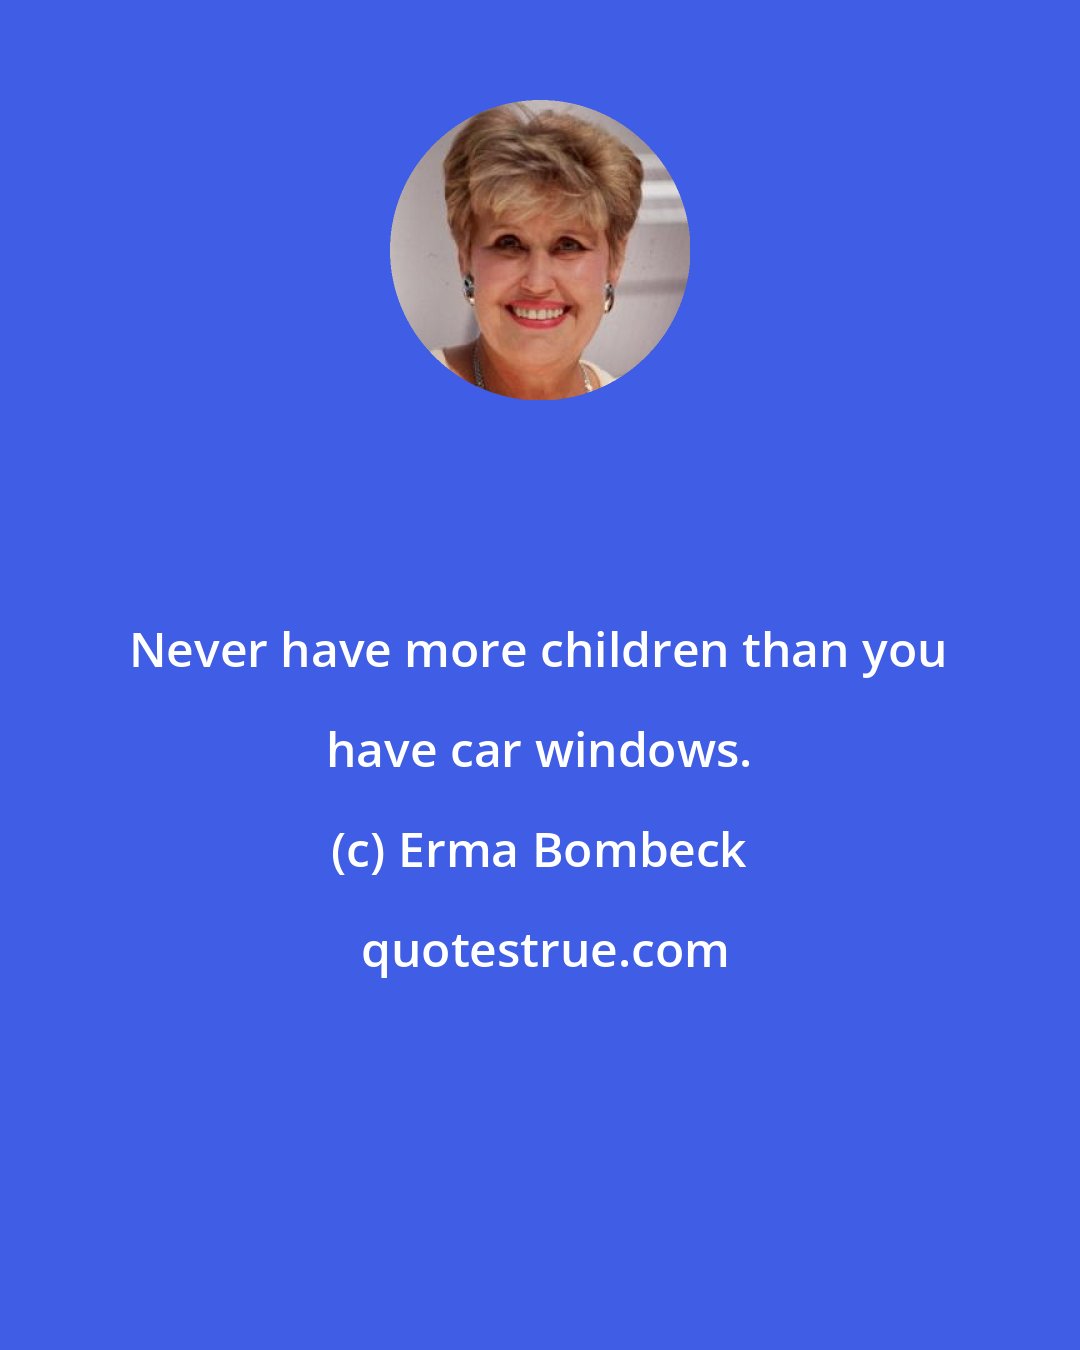 Erma Bombeck: Never have more children than you have car windows.